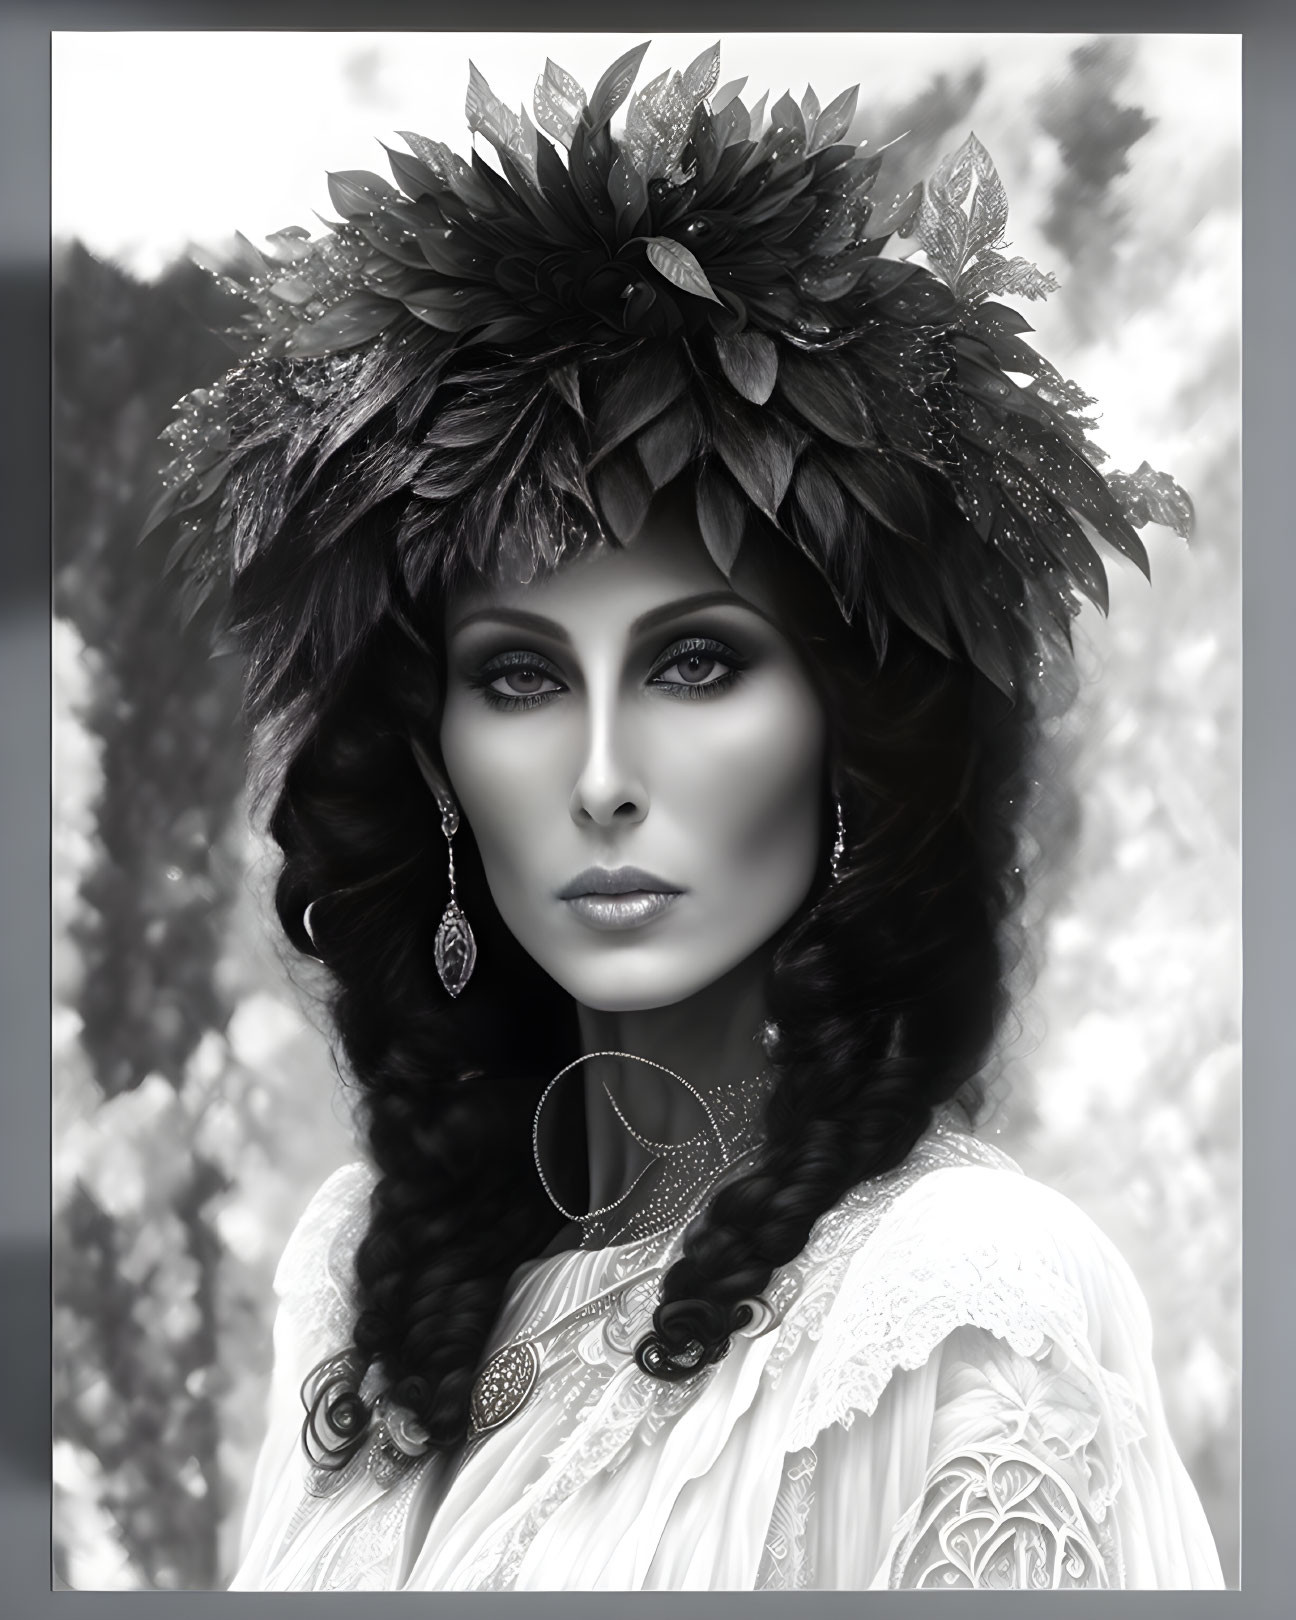 Monochrome portrait of woman with leafy headdress and lace dress